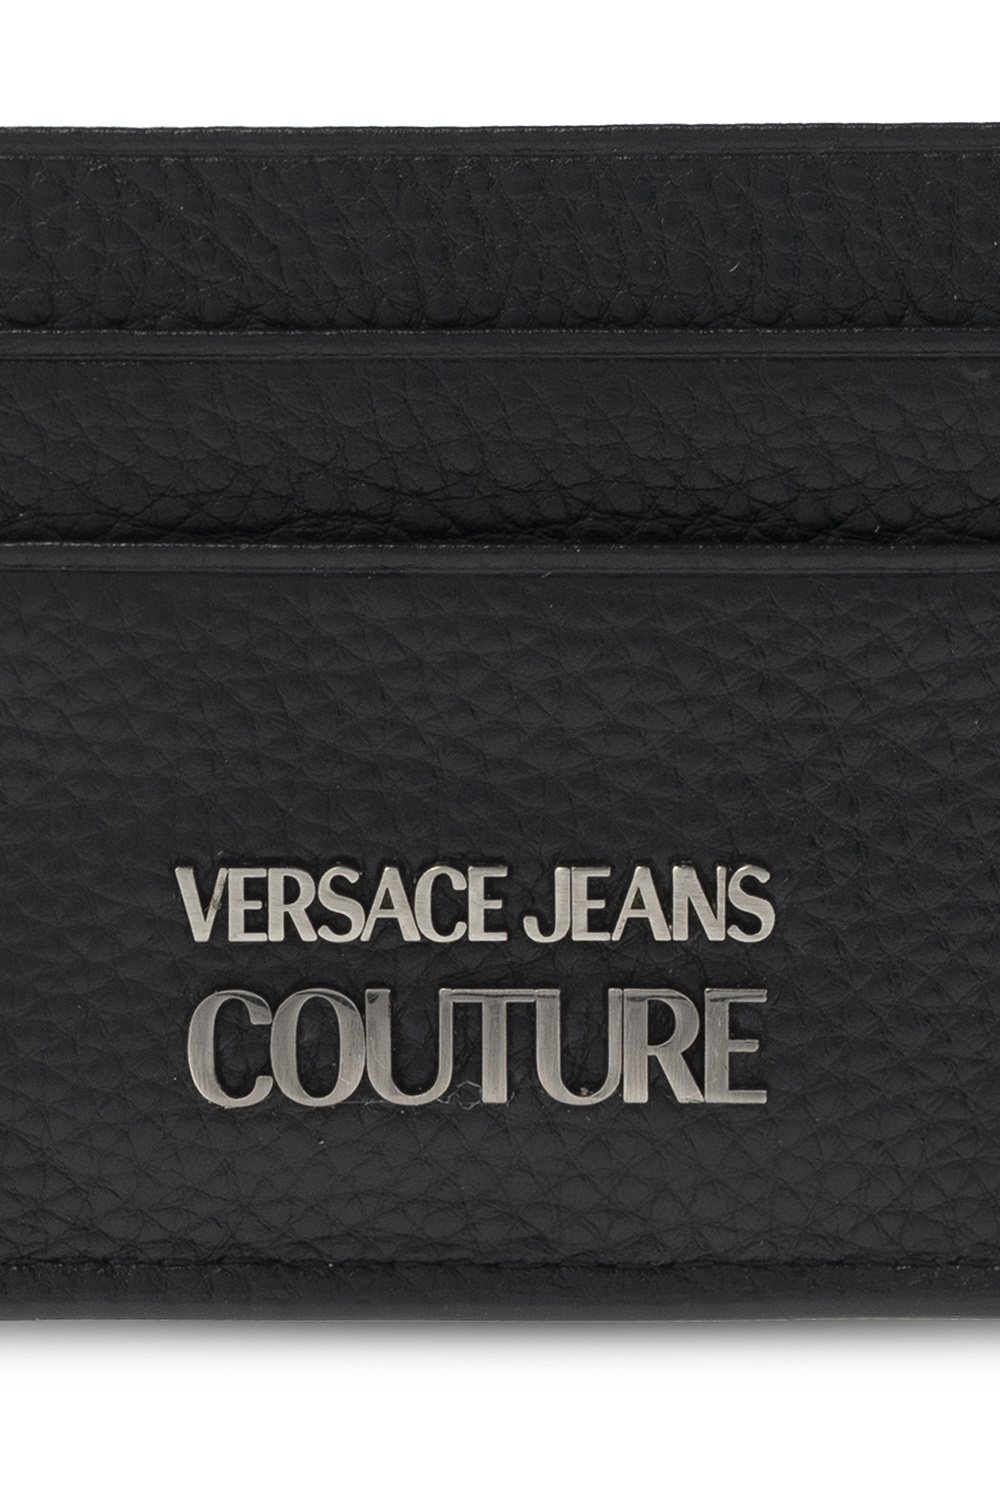 Versace Jeans Couture Leather card holder